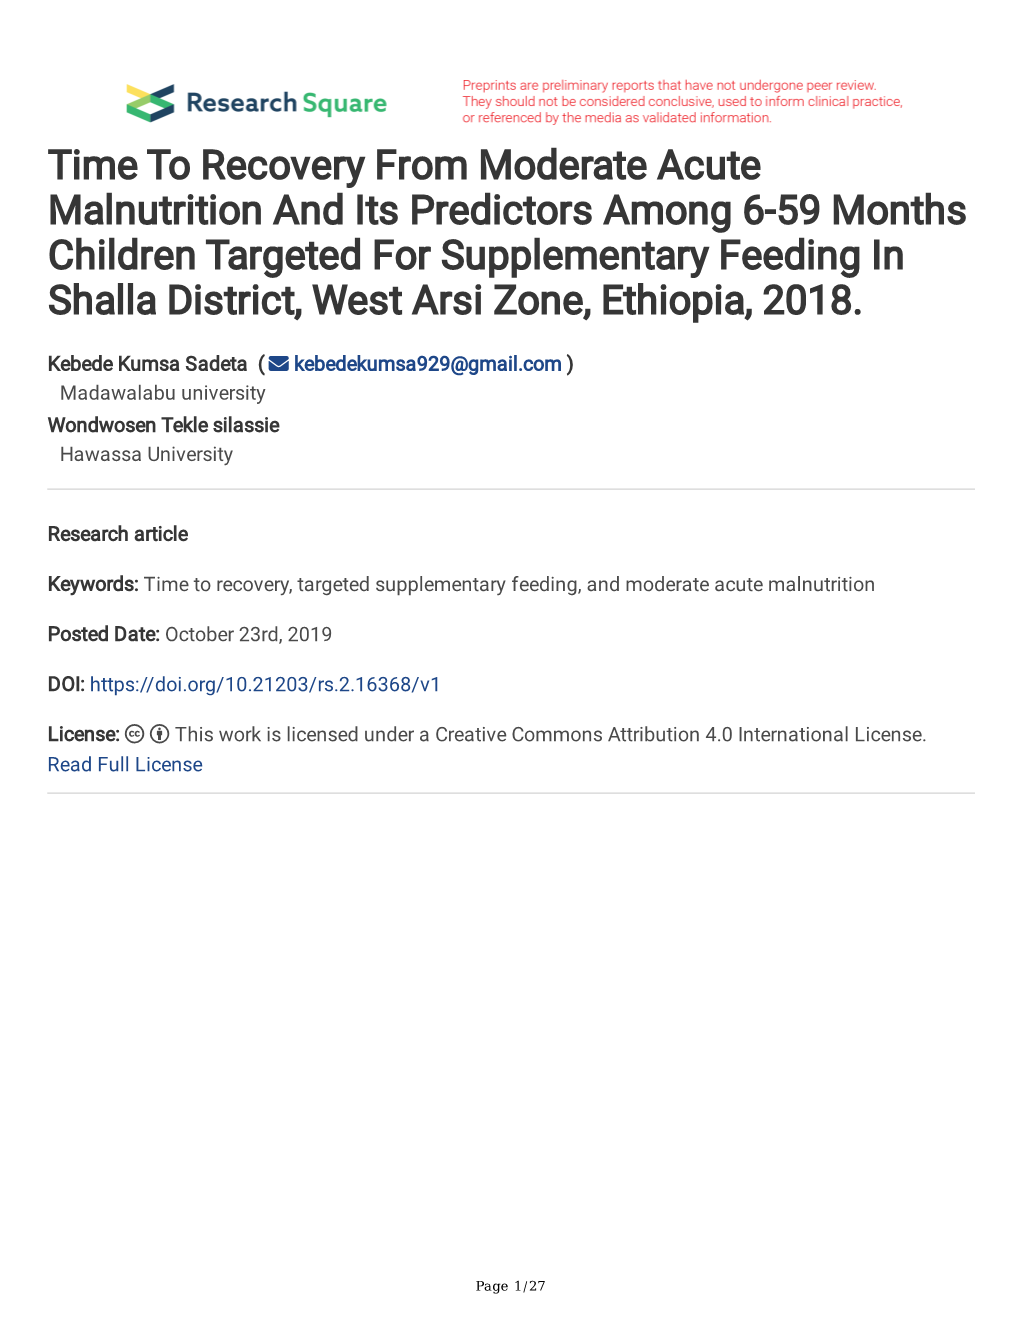 Time to Recovery from Moderate Acute Malnutrition and Its